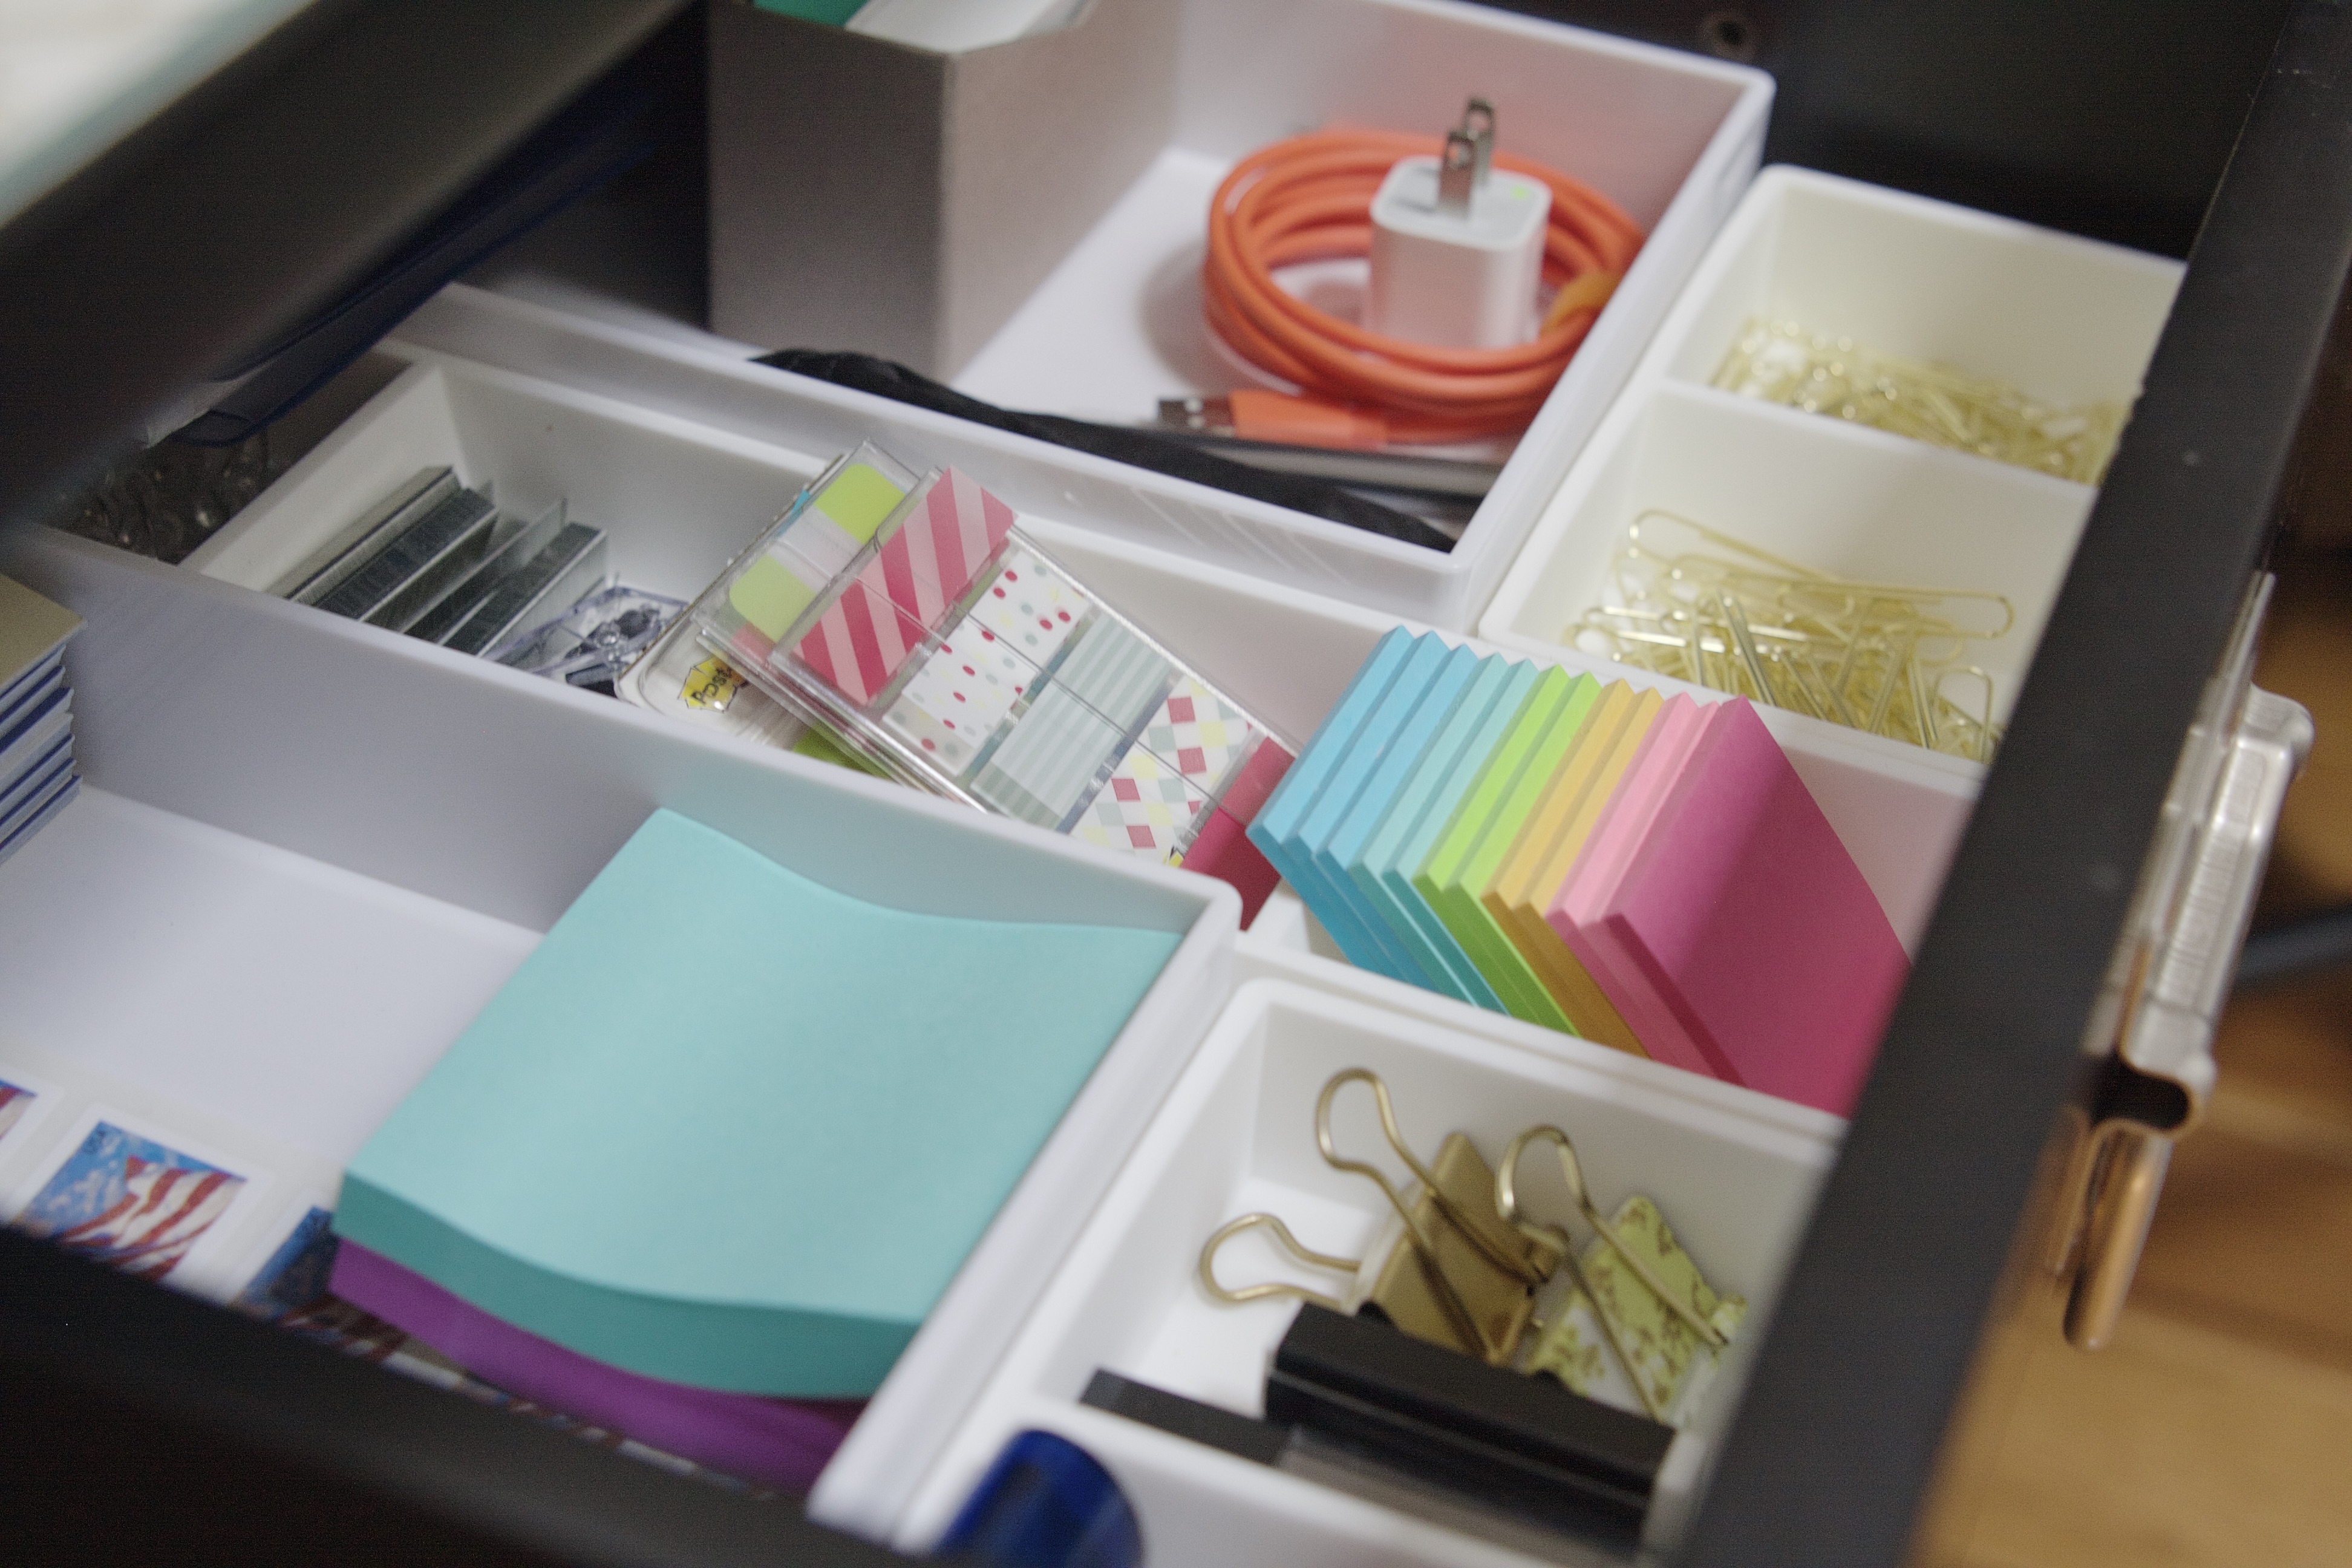 How To Organize Your Office Desk Drawers Drawer Drawers Desk Organizers